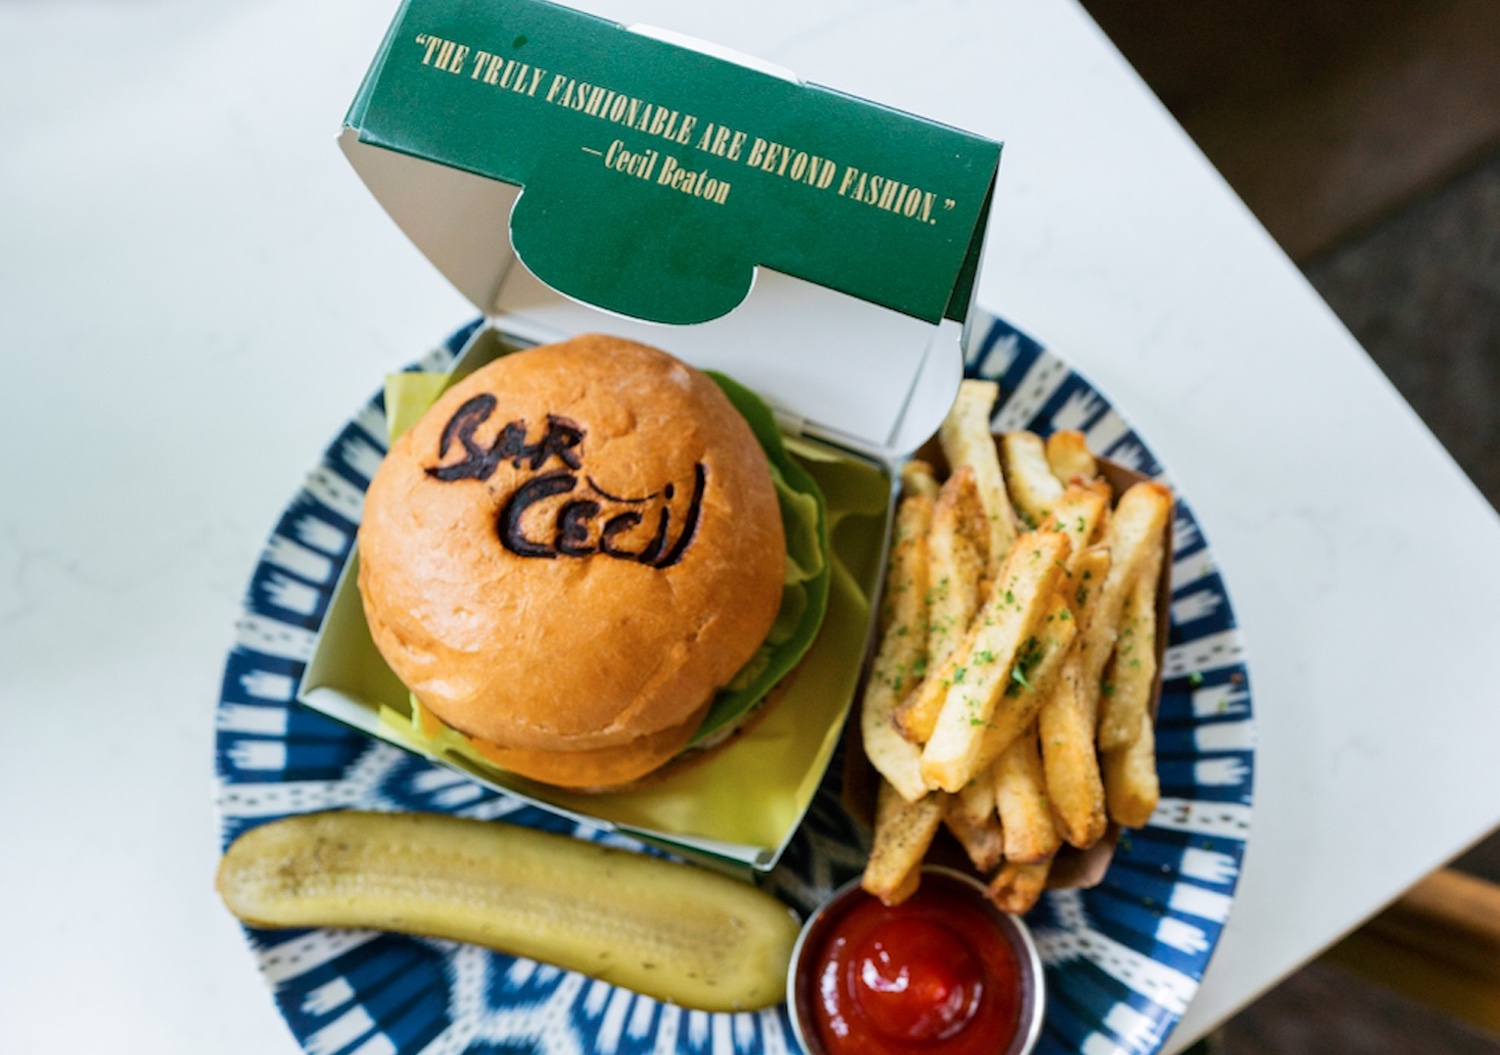 Bar Cecil's Beaton Burger, with the name "Bar Cecil" burnt into the top of the bun, with a side of fries and a pickle 